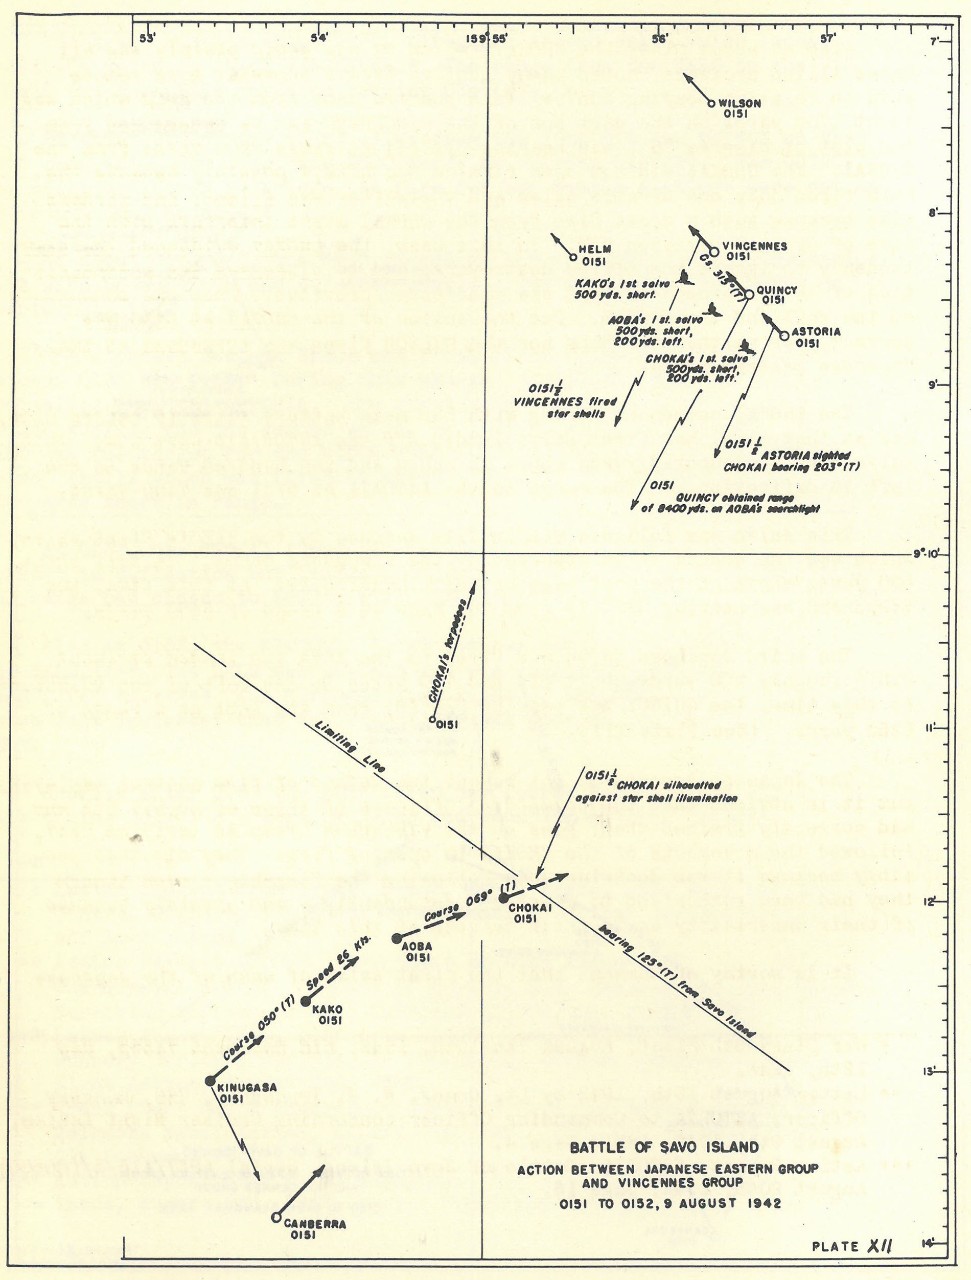 Plate 12: Battle of Savo Island, Action Between Japanese Eastern Group and Vincennes Group, 0151 to 0152, 9 August 1942 - chart - The Battle of Savo Island August 9, 1942 Strategical and Tactical Analysis